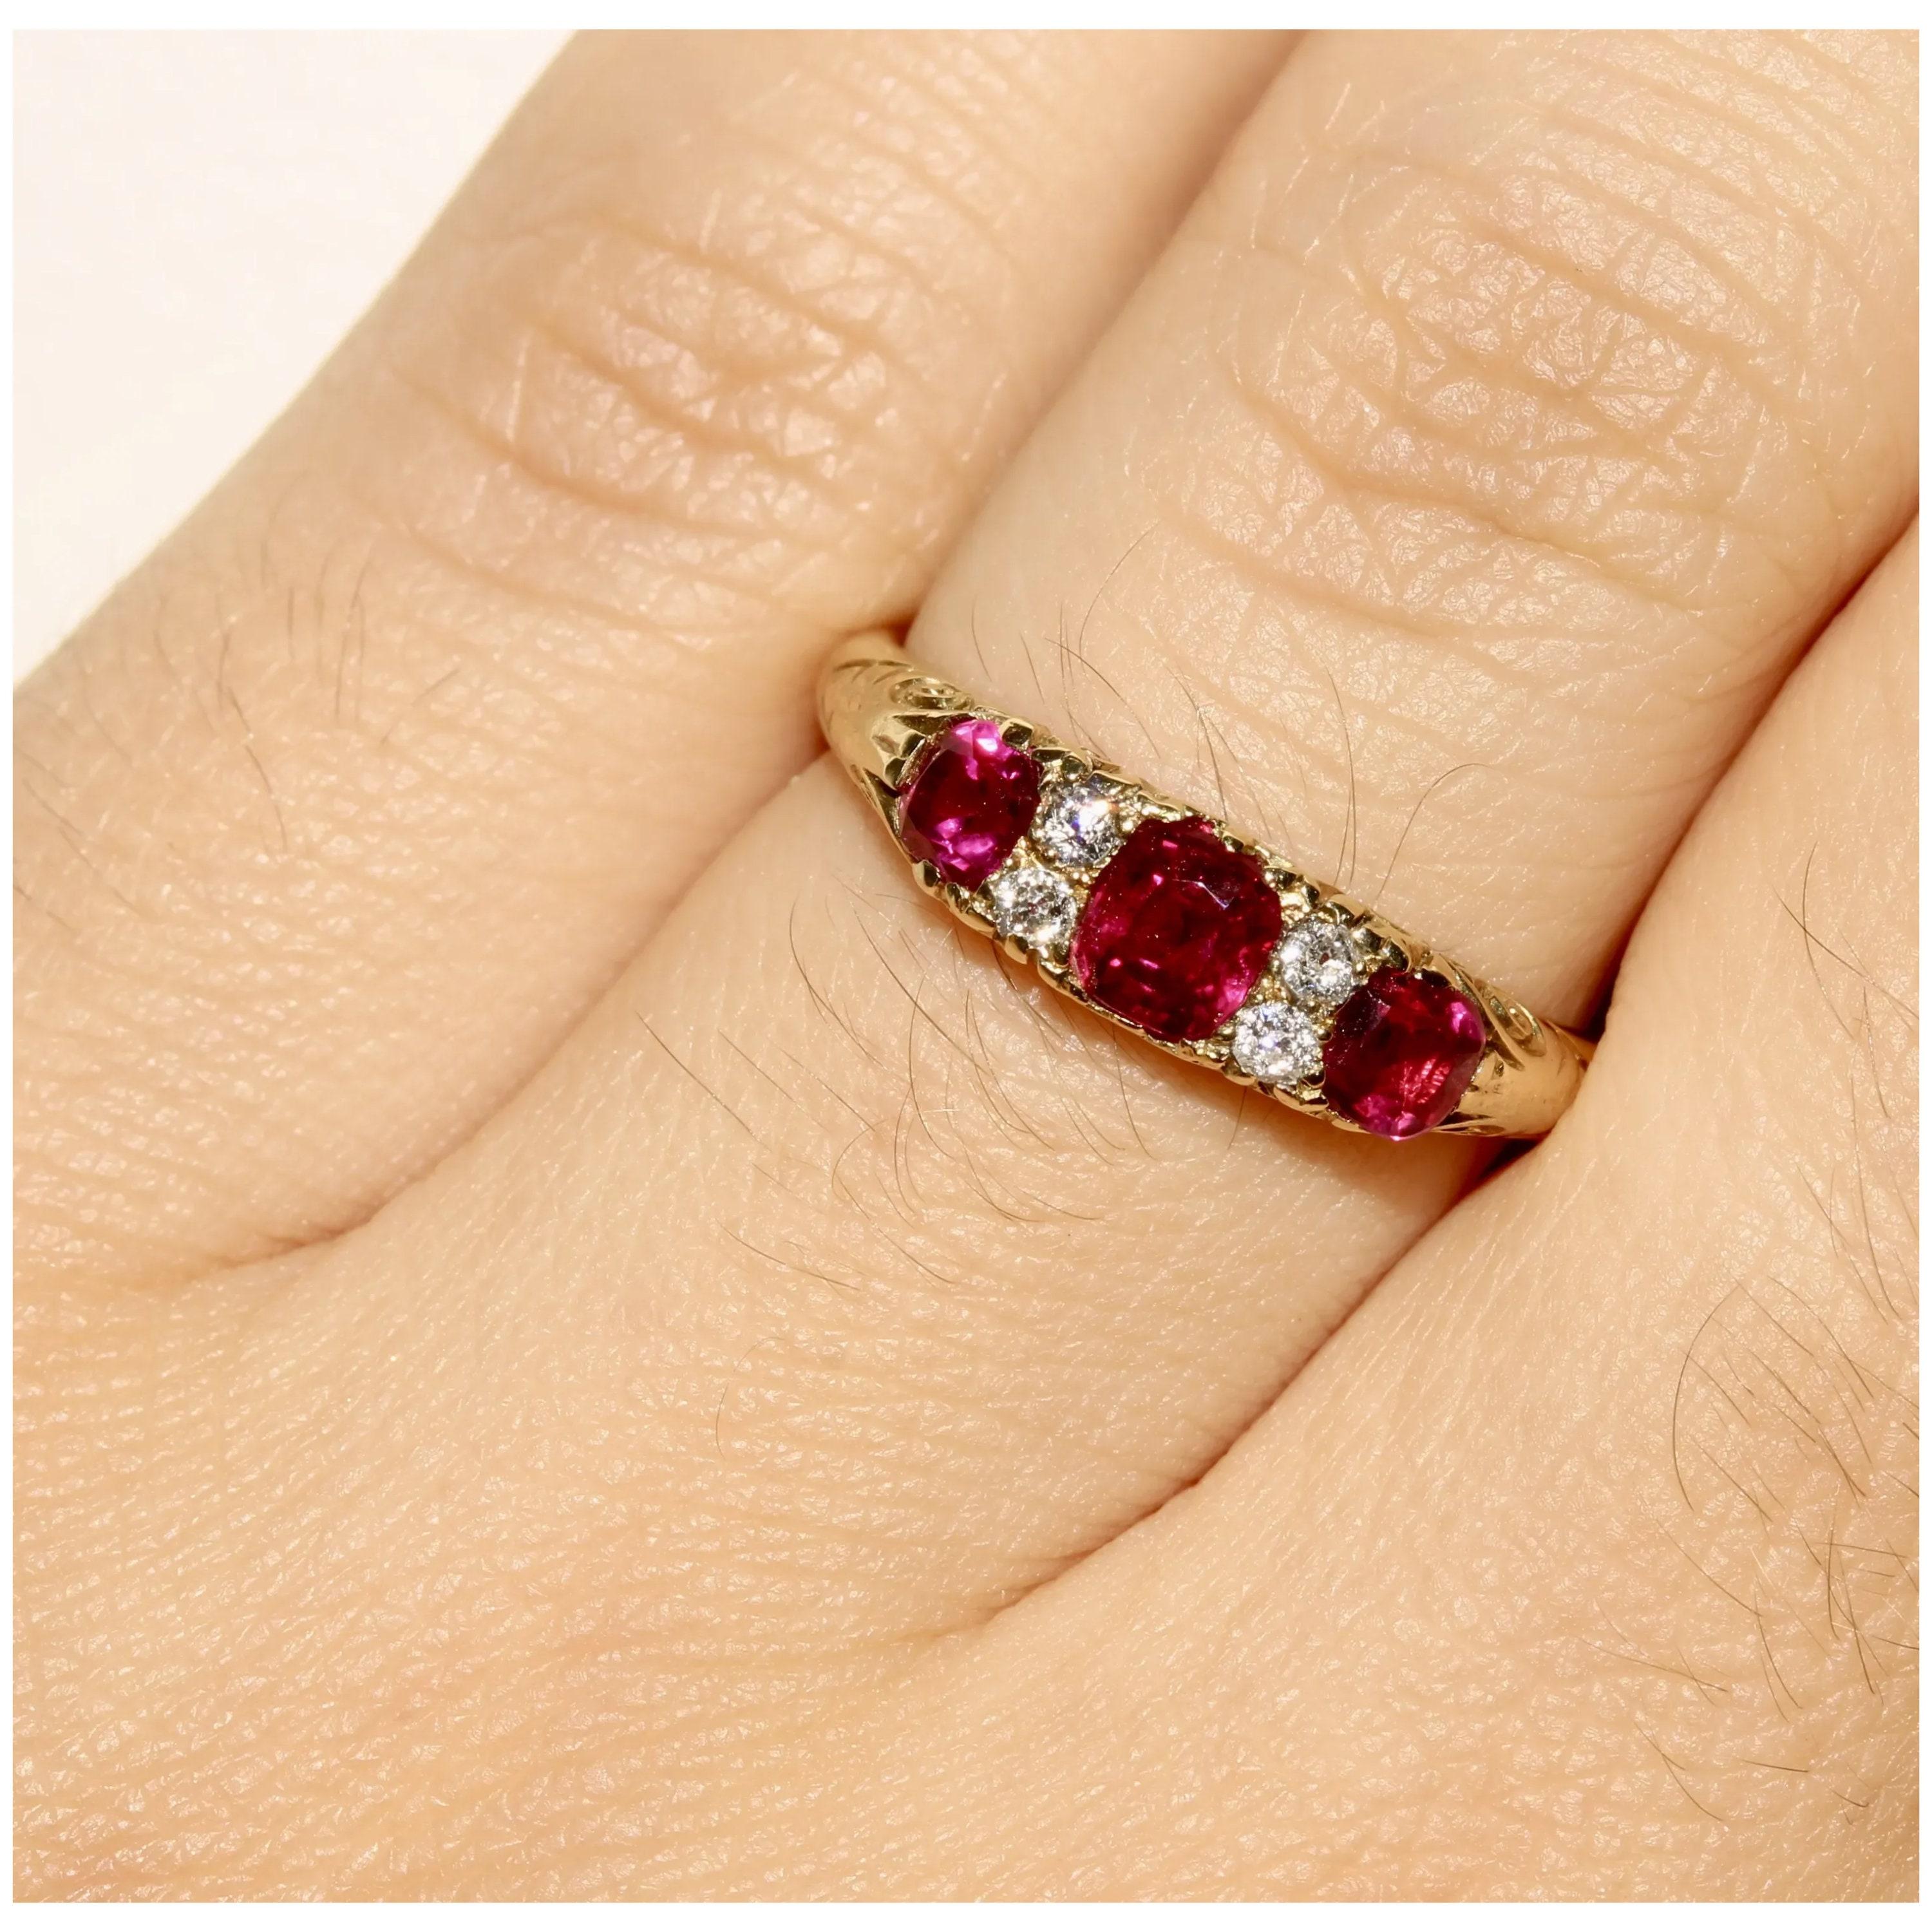 For Sale:  2 Carat Natural Ruby Diamond Engagement Ring Set in 18K Gold, Fashion Ring 5